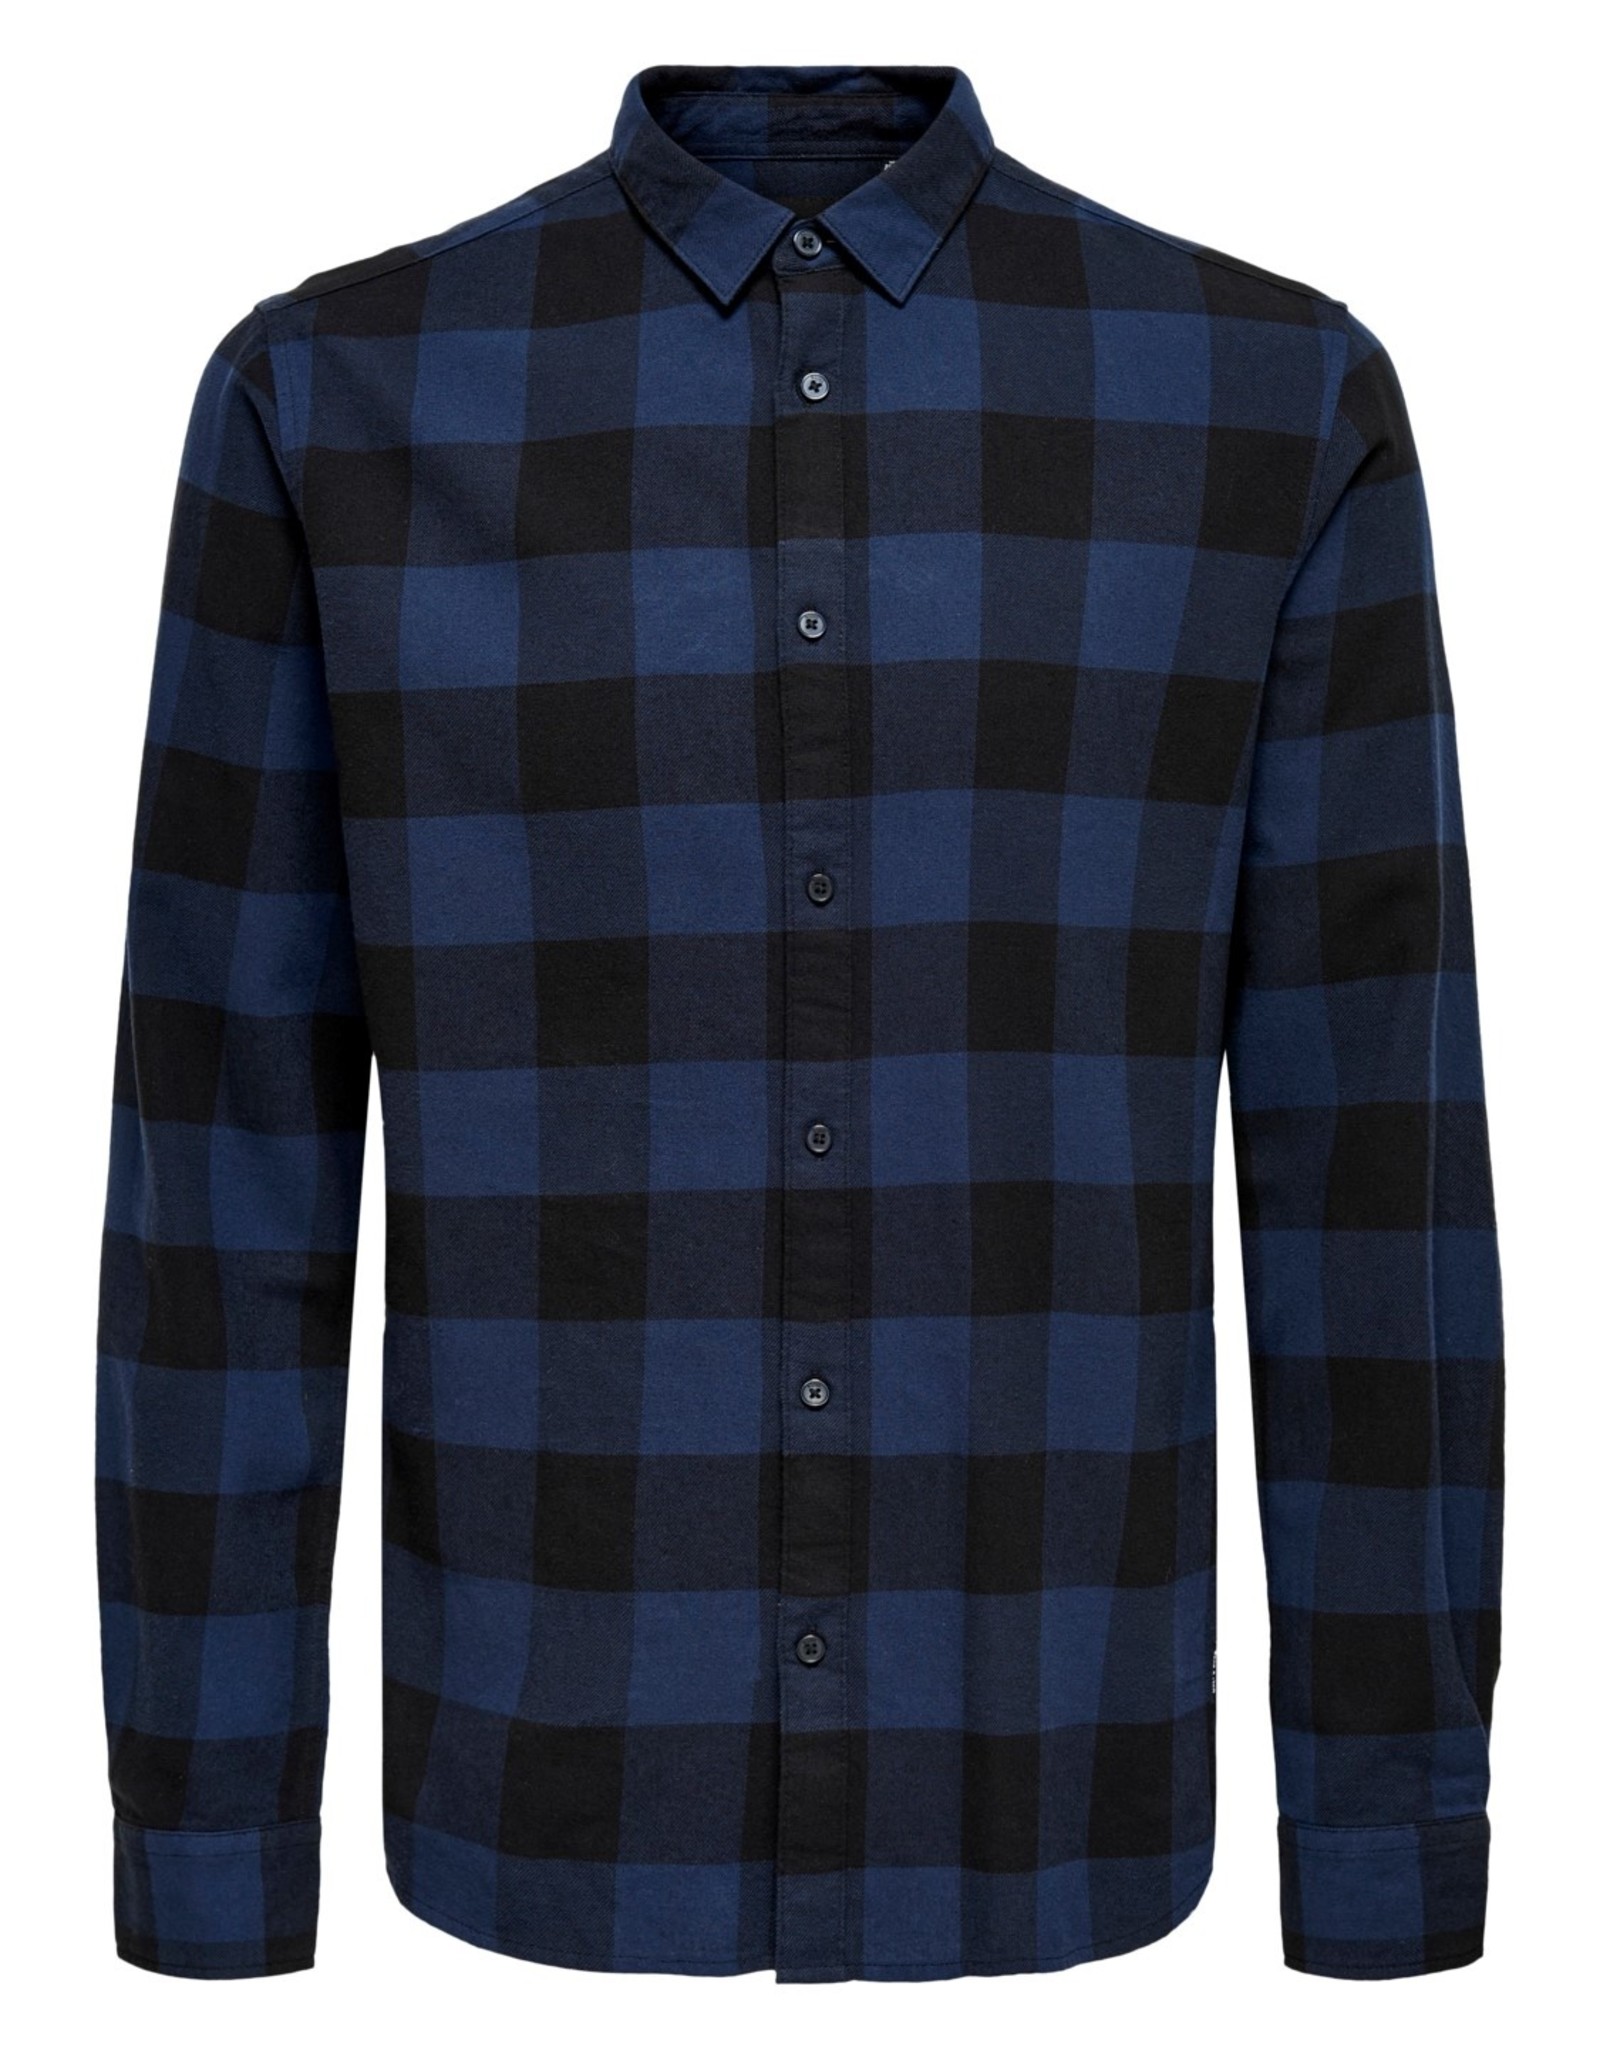 Only and Sons Gudmund Checked Shirt